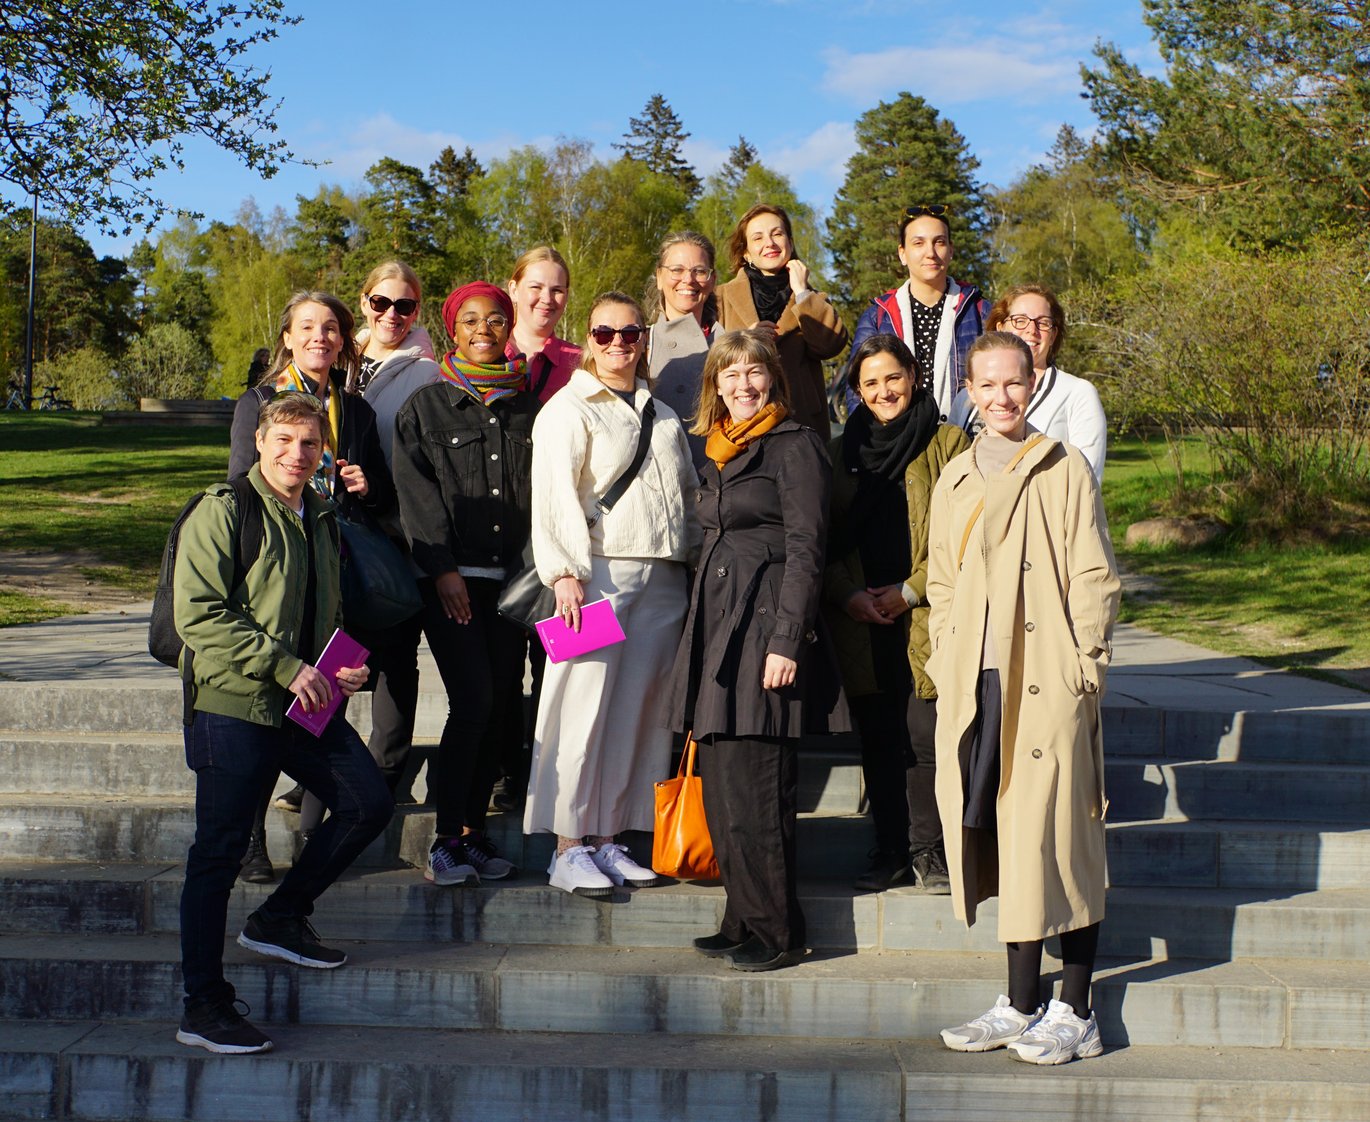 A group of 13 persons outside in a sculpture park